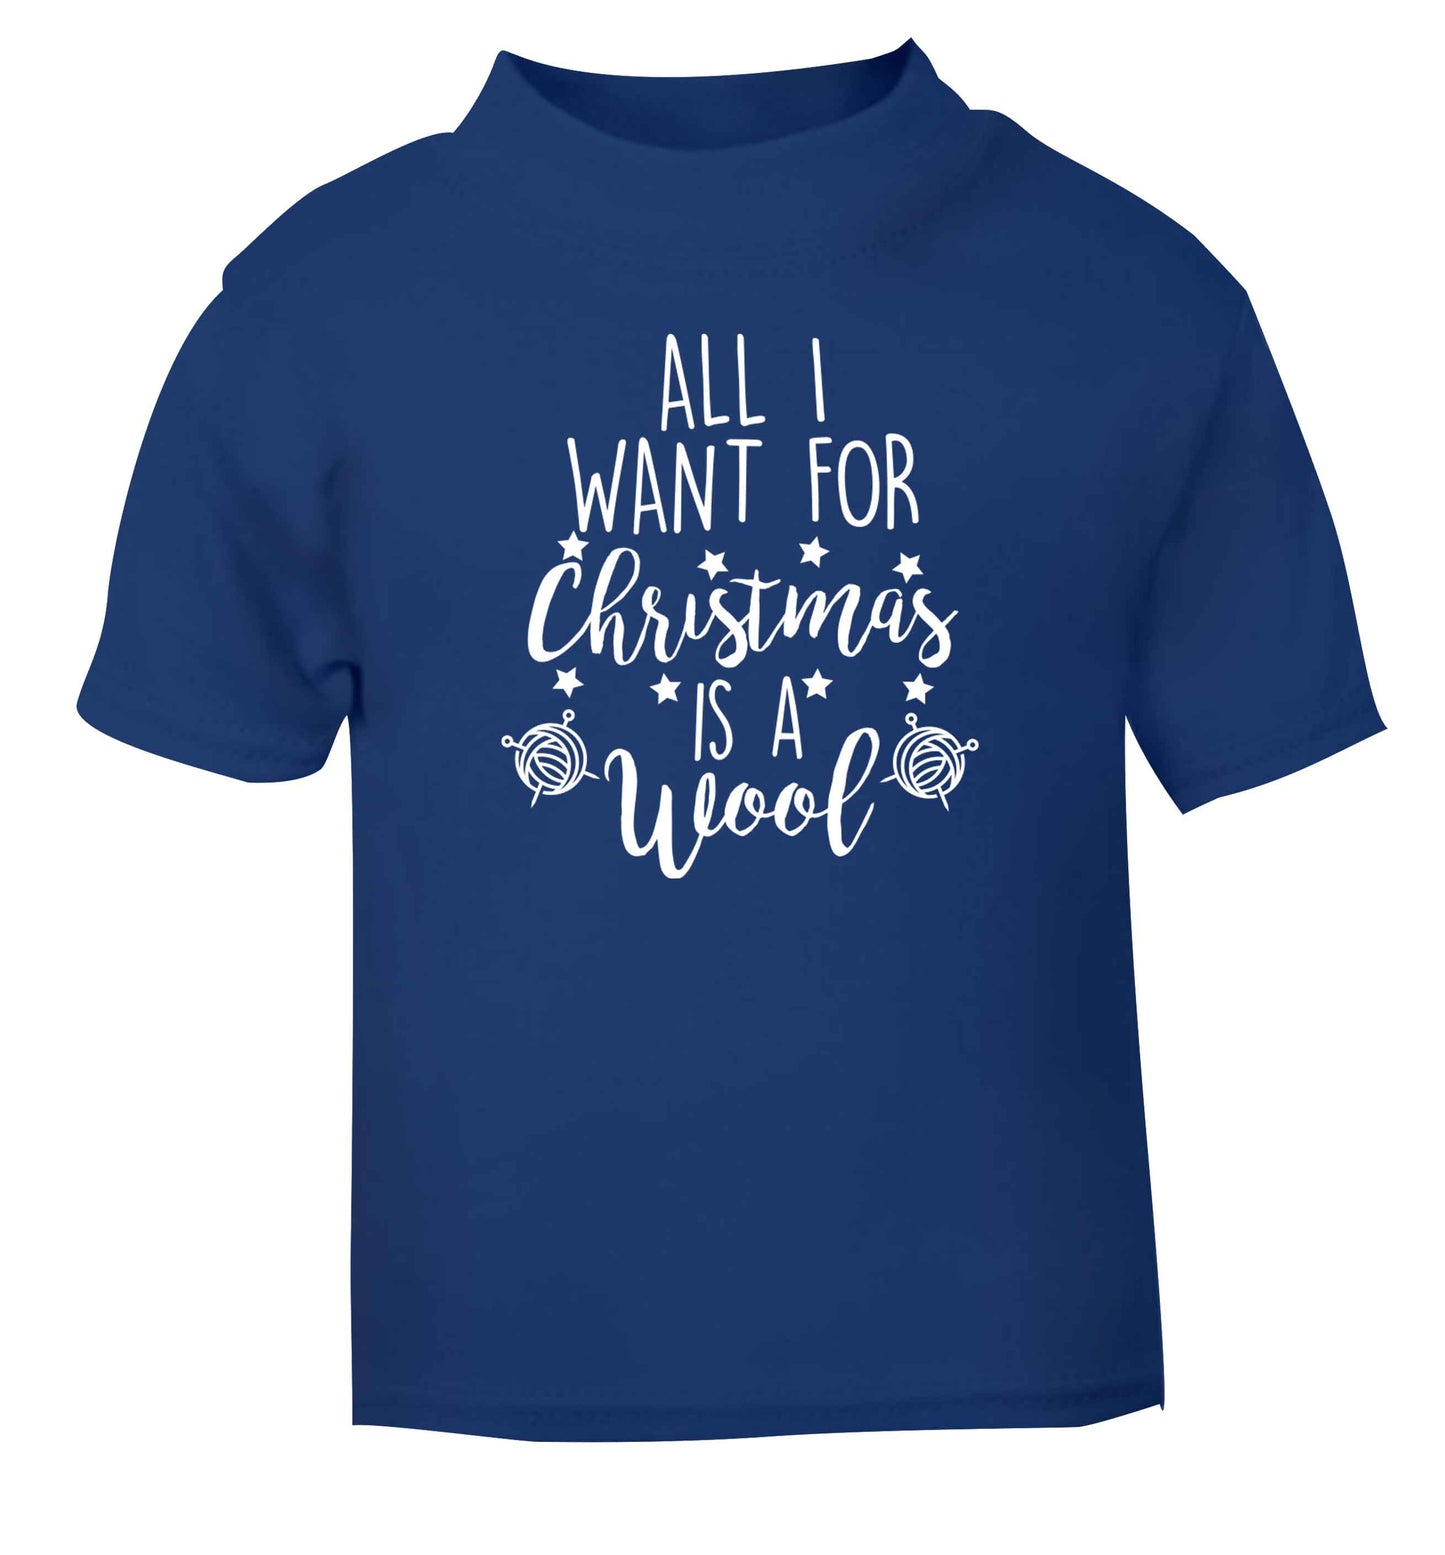 All I want for Christmas is wool! blue Baby Toddler Tshirt 2 Years